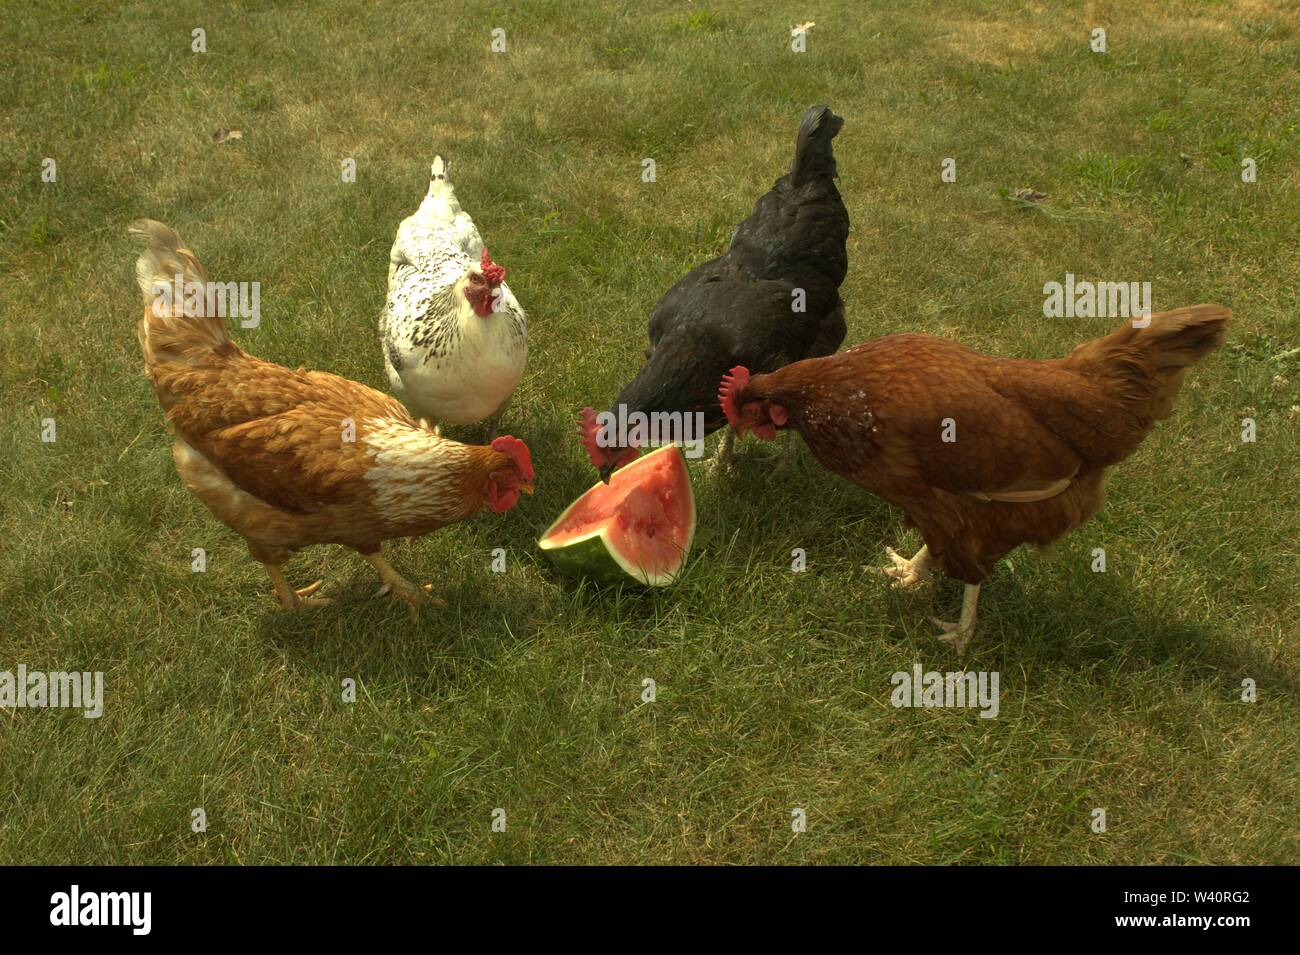 Four Hens Share A Slice Of Watermelon On A Hot Summer's Day Stock Photo